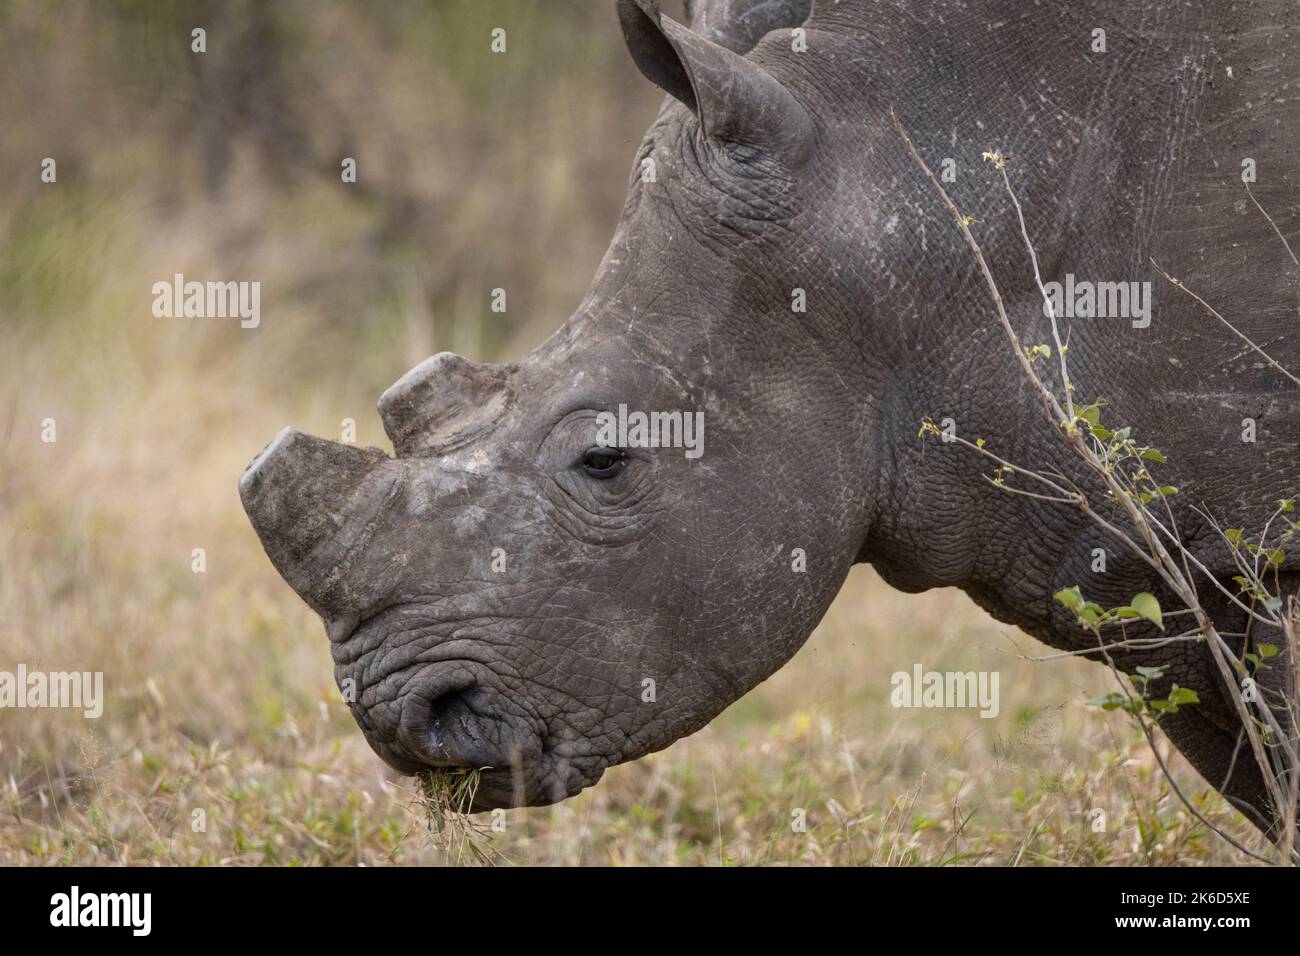 Side profile of a rhinoceros that has been dehorned to prevent poaching Stock Photo